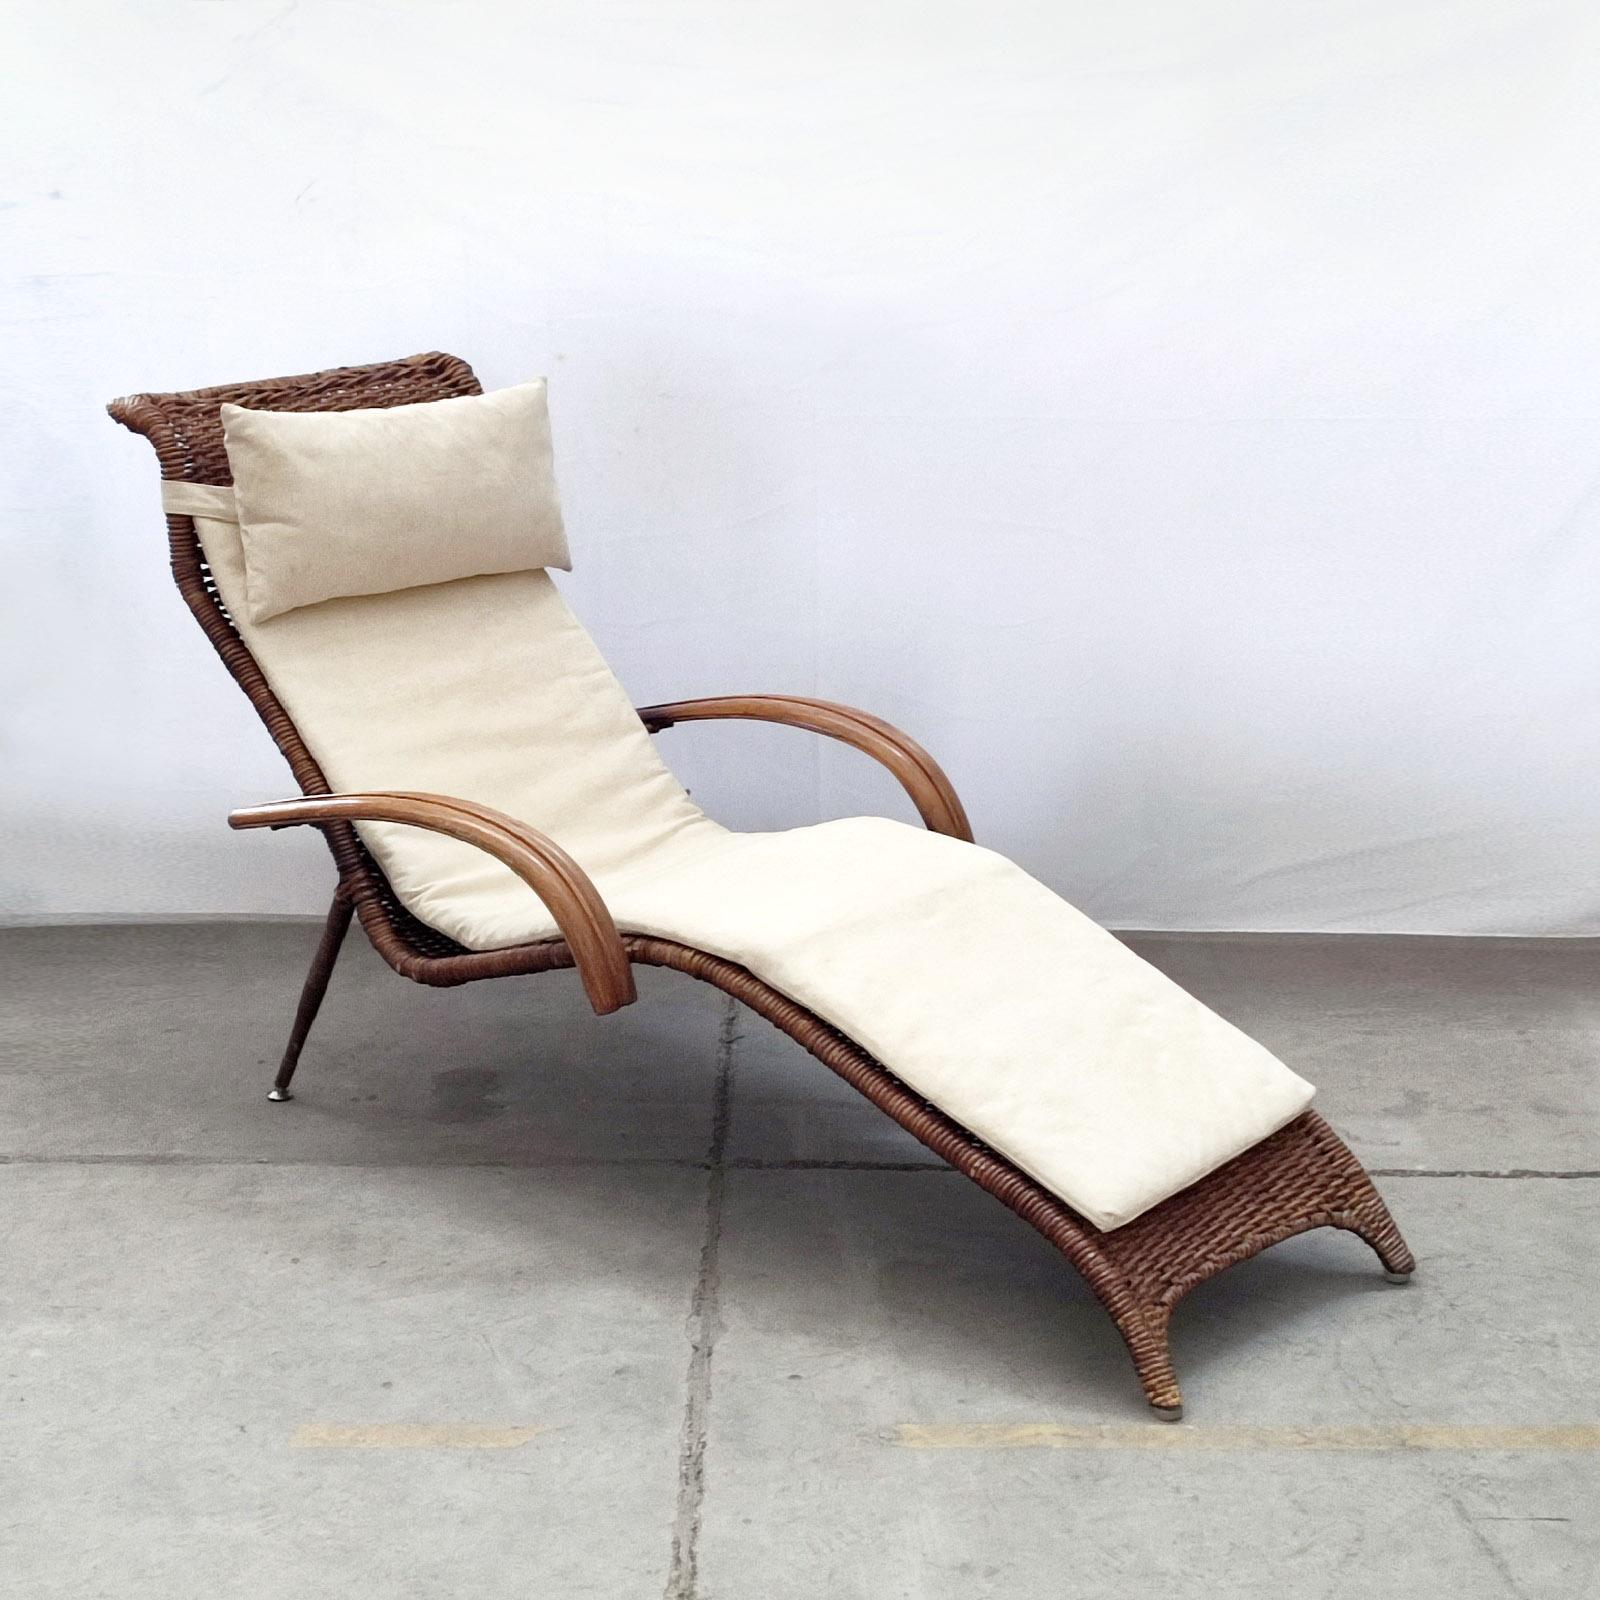 Mid-Century, Sculptural Italian Rattan and Bamboo Chaise Longue Lounge Chair For Sale 1